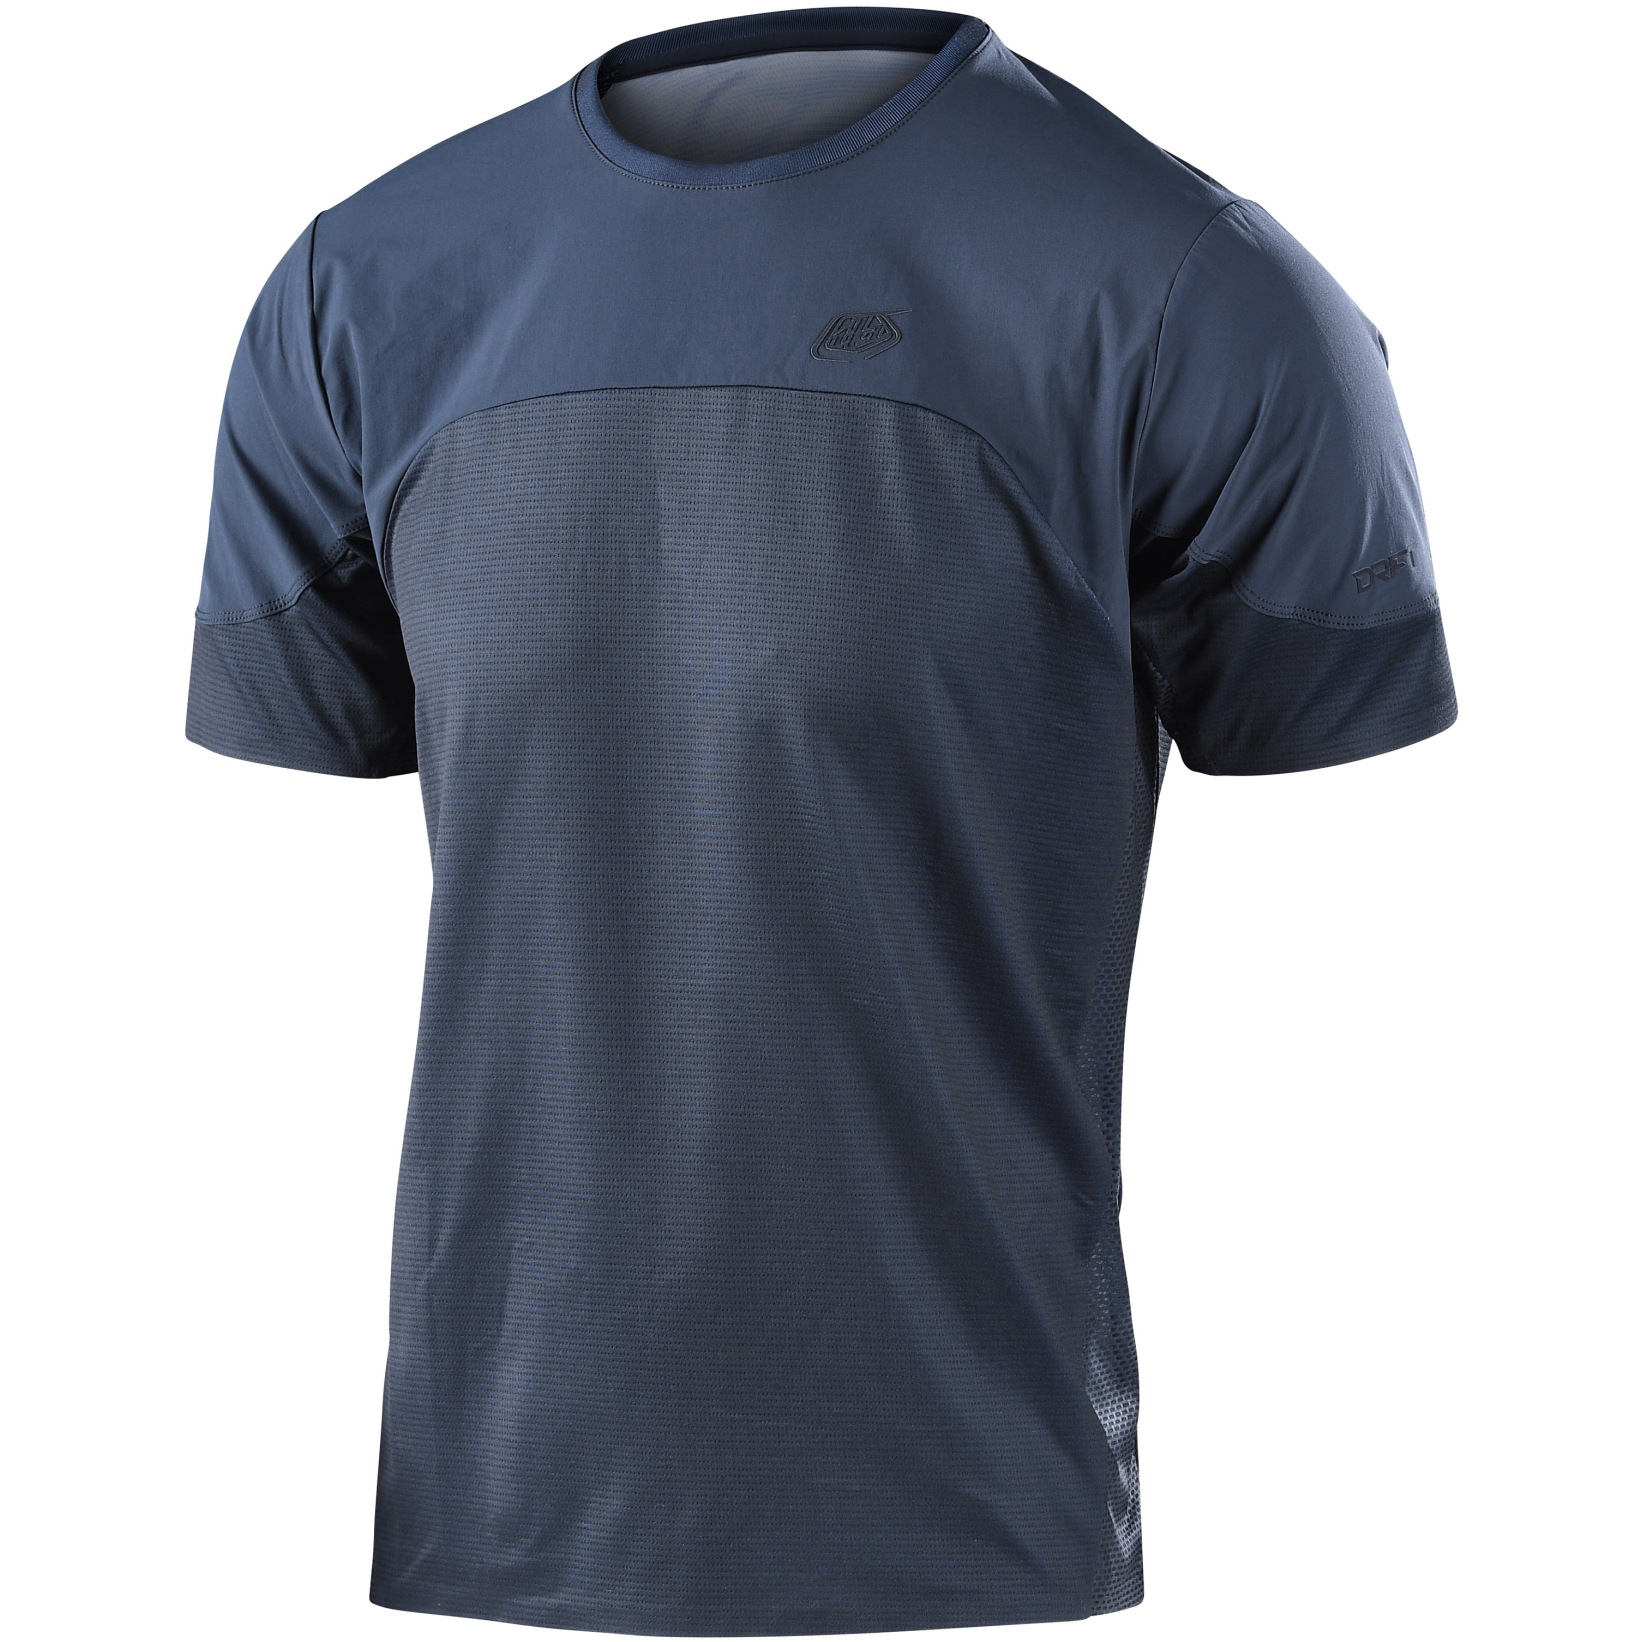 Picture of Troy Lee Designs Drift Short Sleeve Jersey - Solid Dark Charcoal